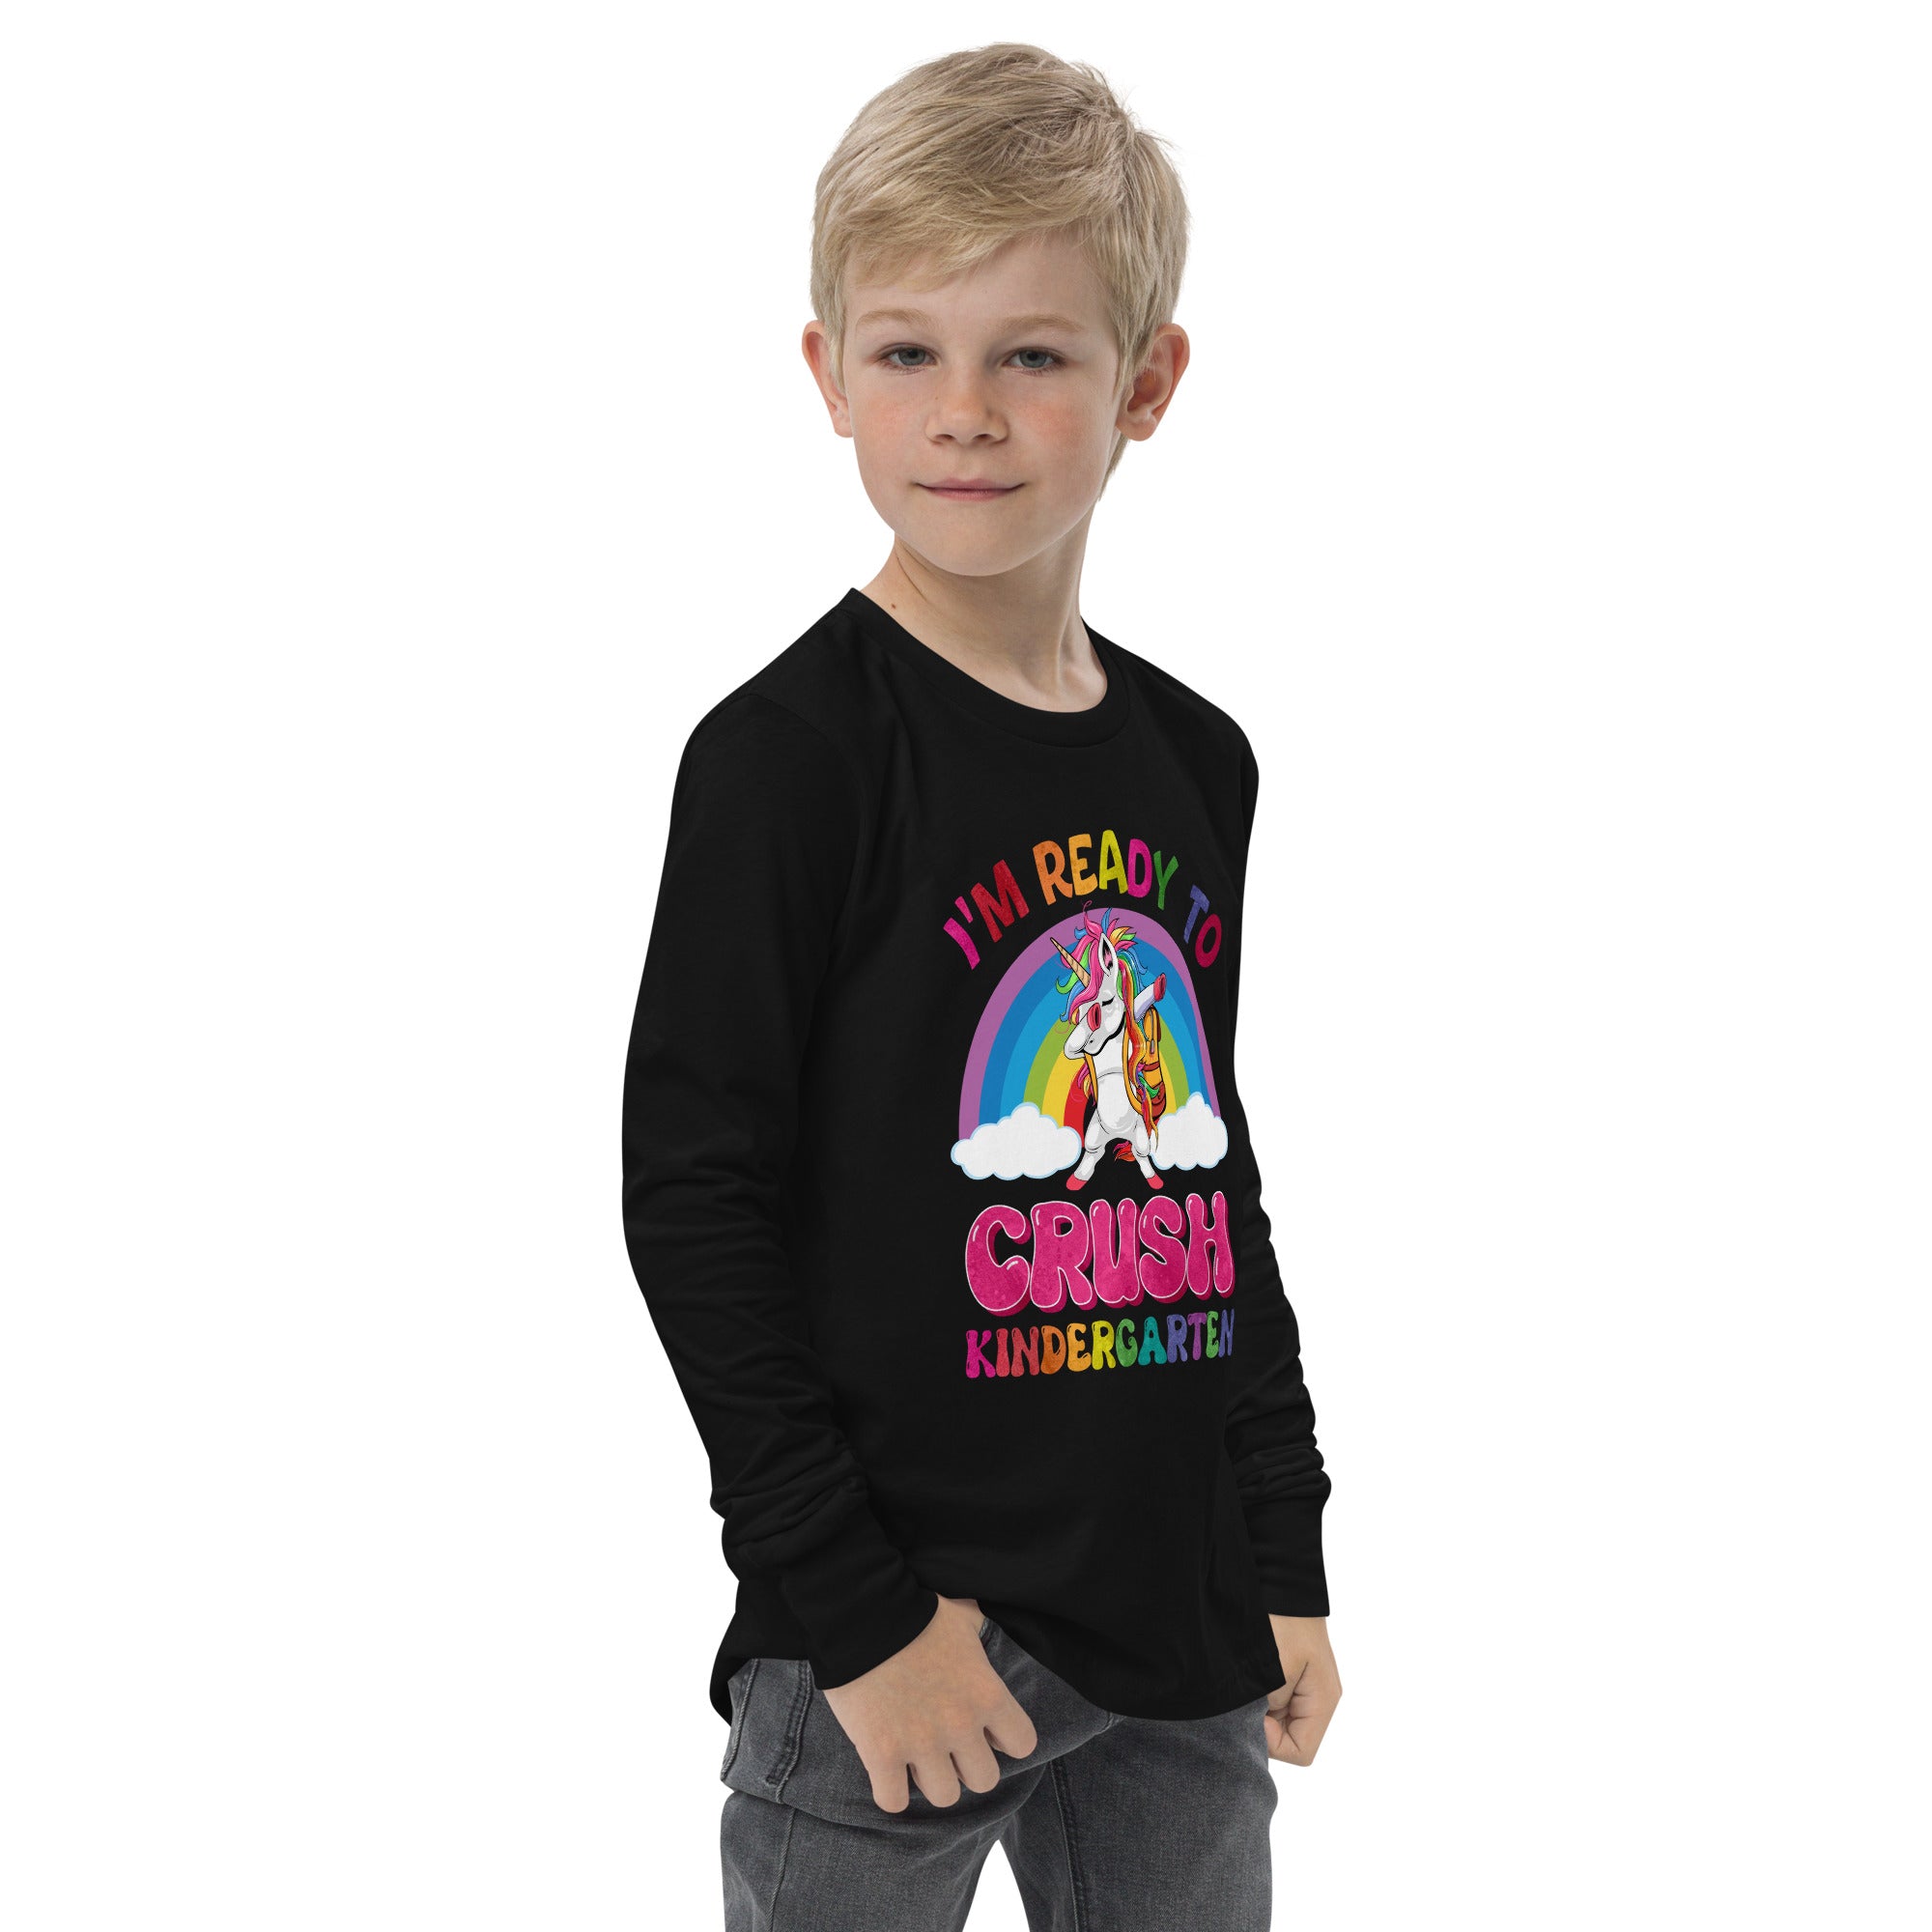 Youth long sleeve tee, Back to School ,Soft Cotton, Unisex,